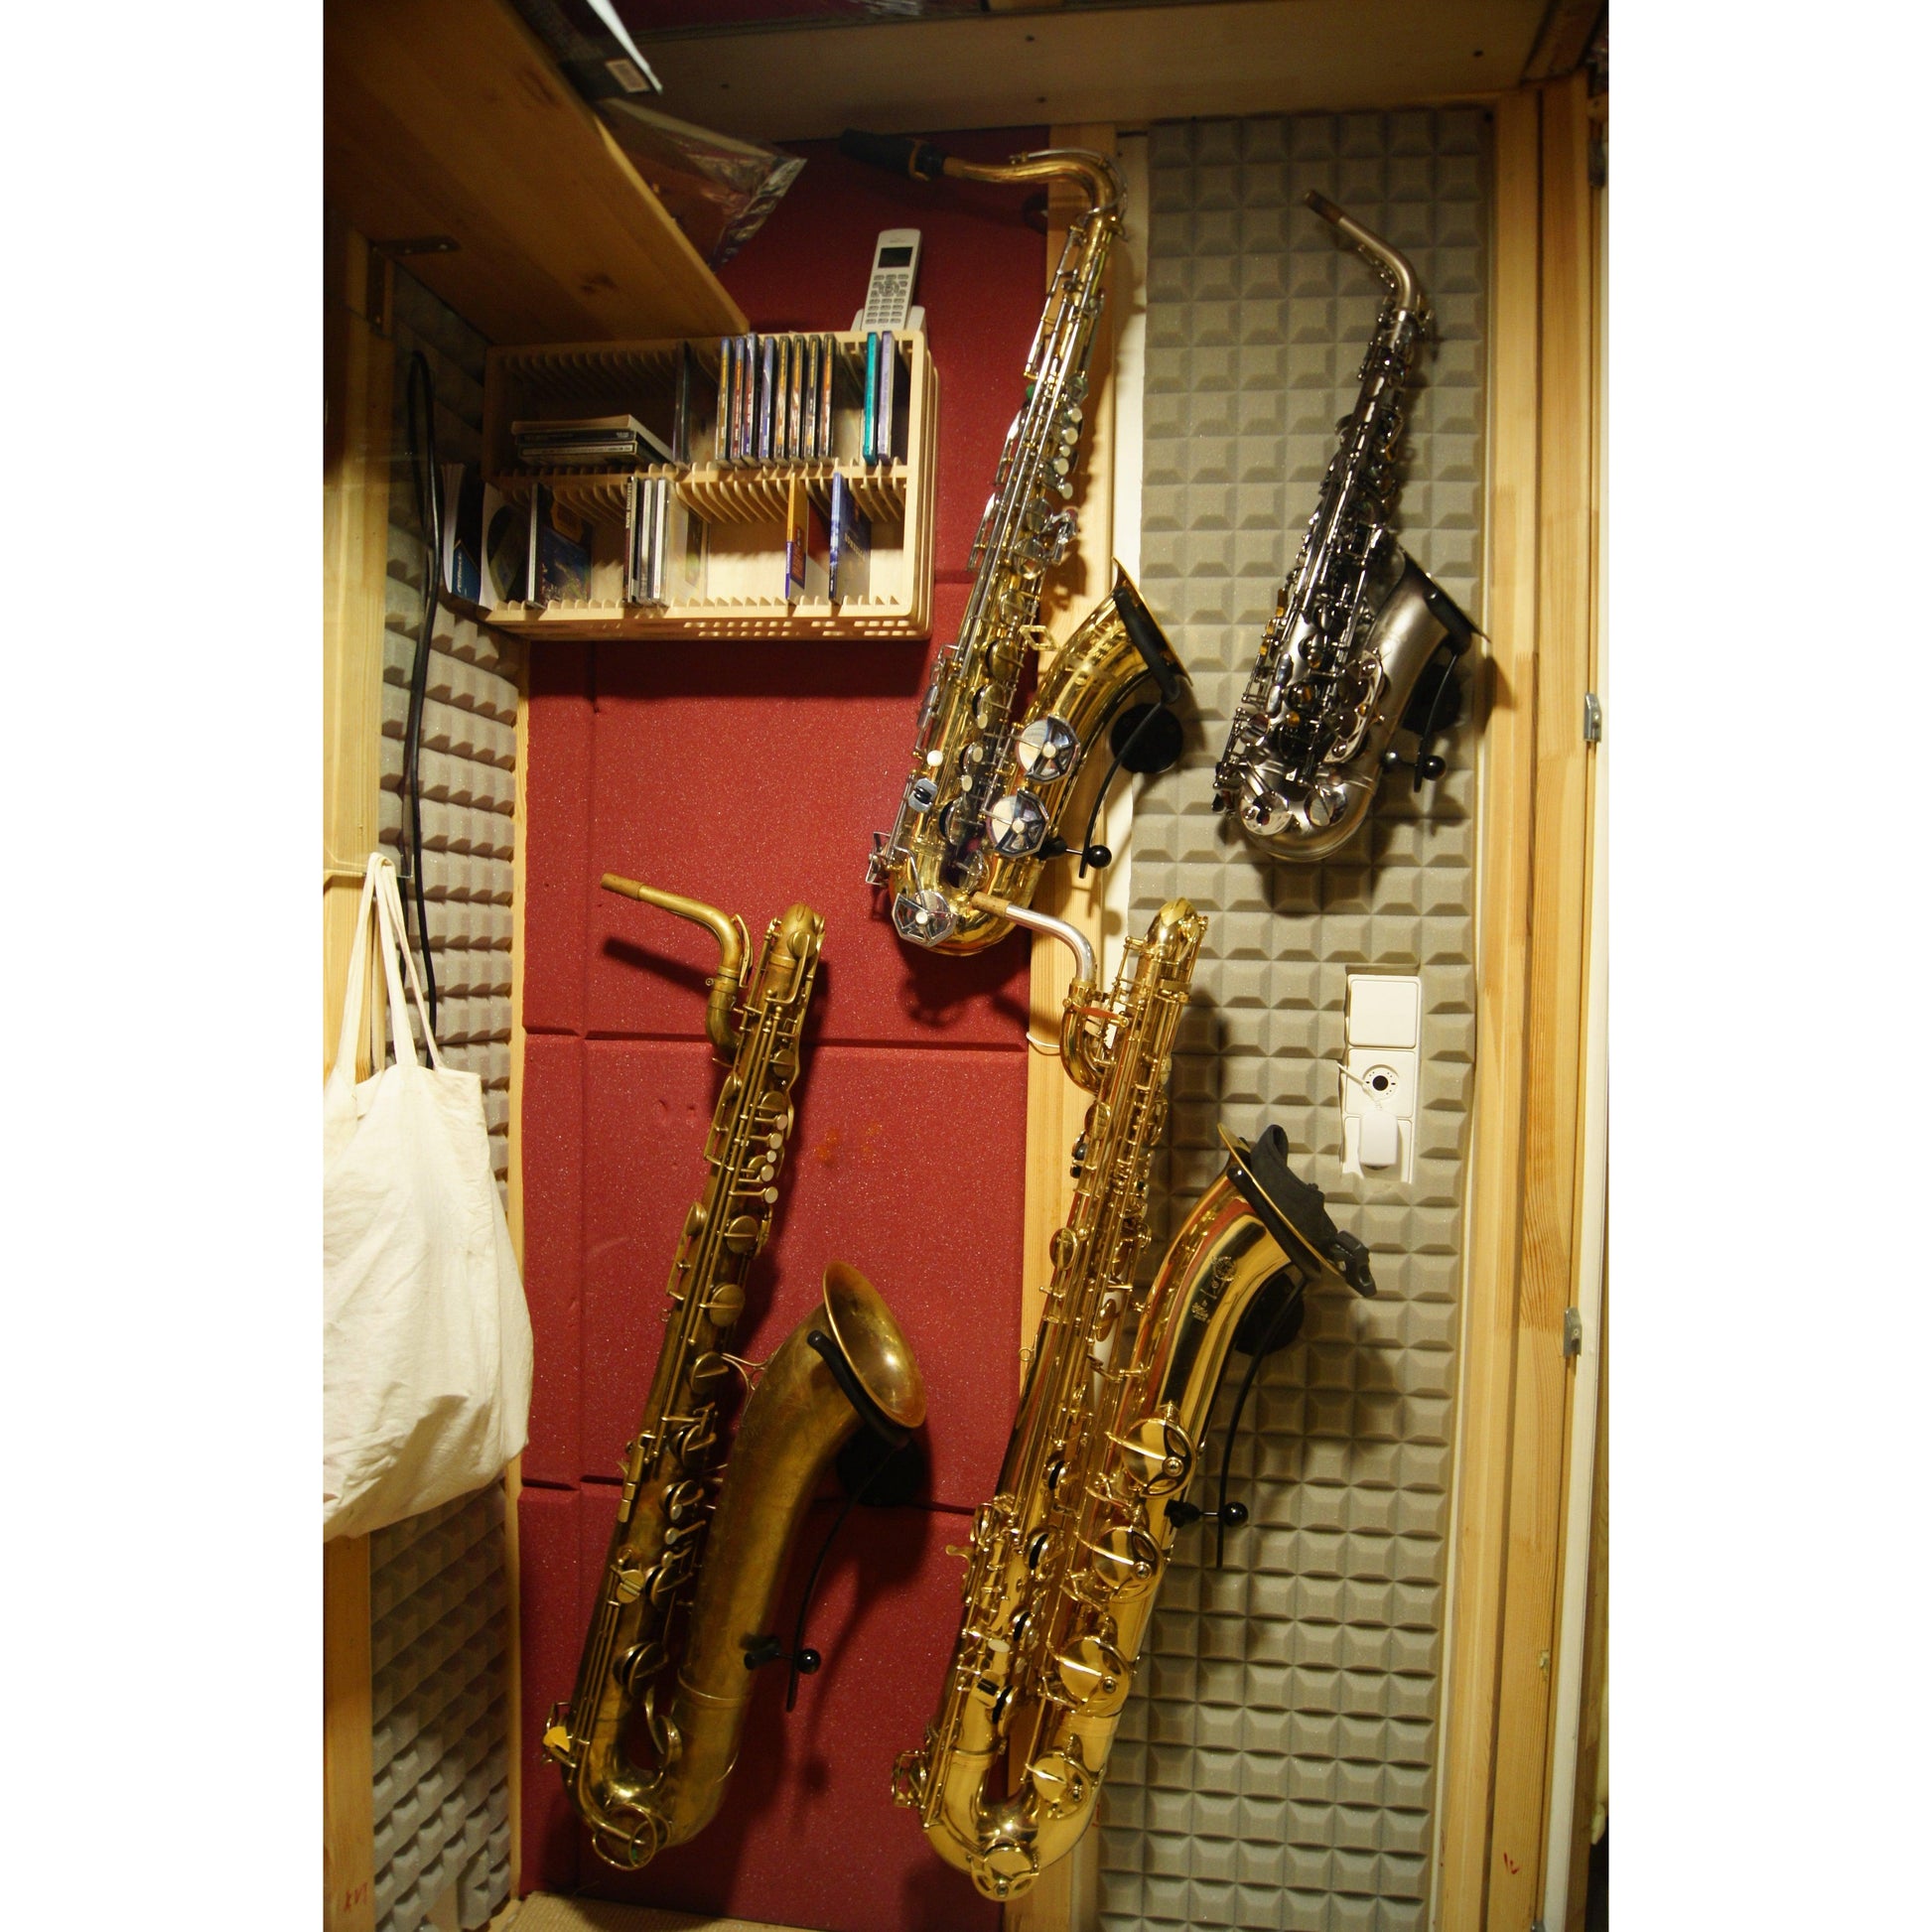 baritone tenor and alto saxophones in Locoparasaxo wall-mounted stands on padded studio wall